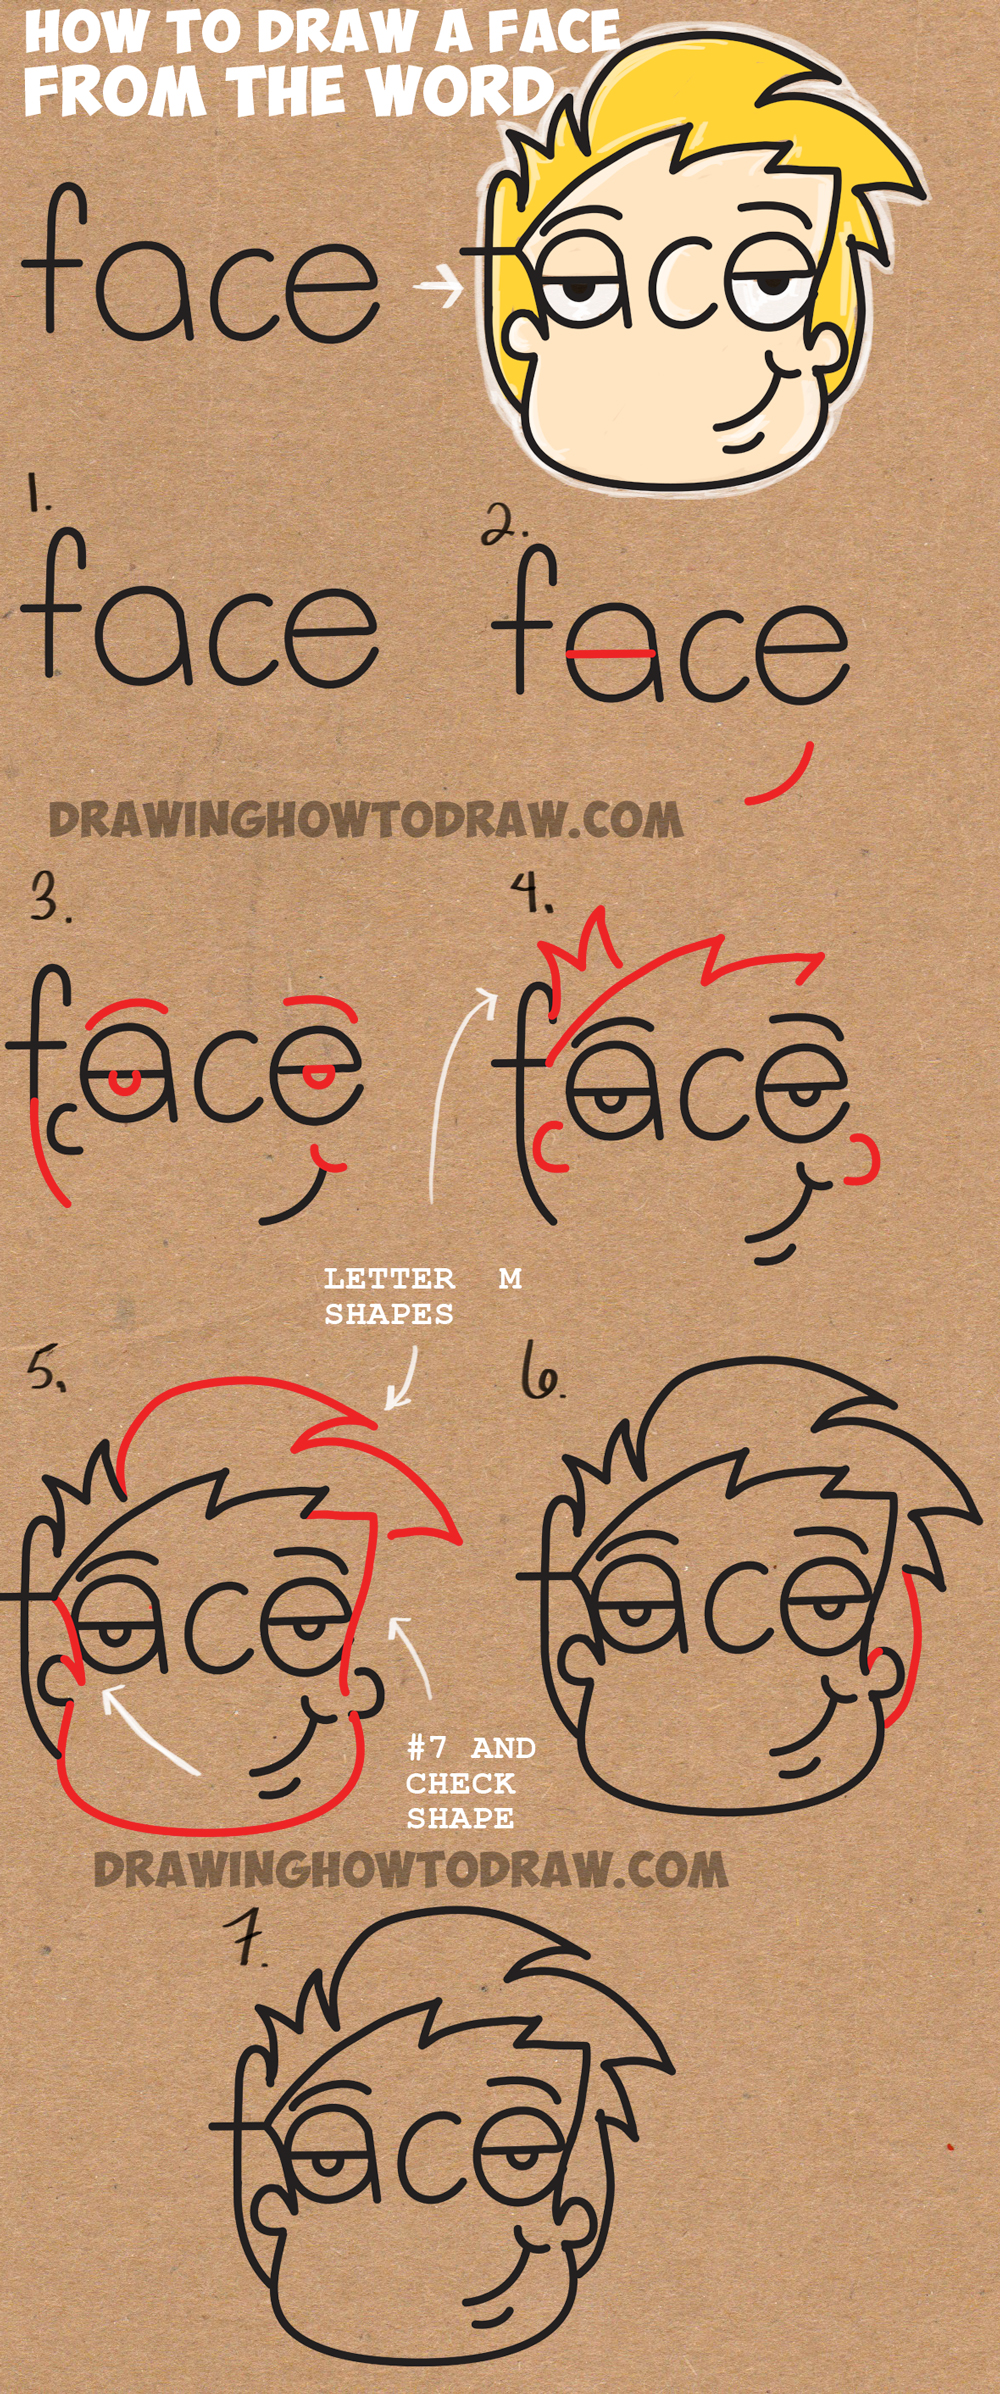 Learn How to Draw Cartoon Faces from the Word Face Simple Steps Drawing Lesson for Kids